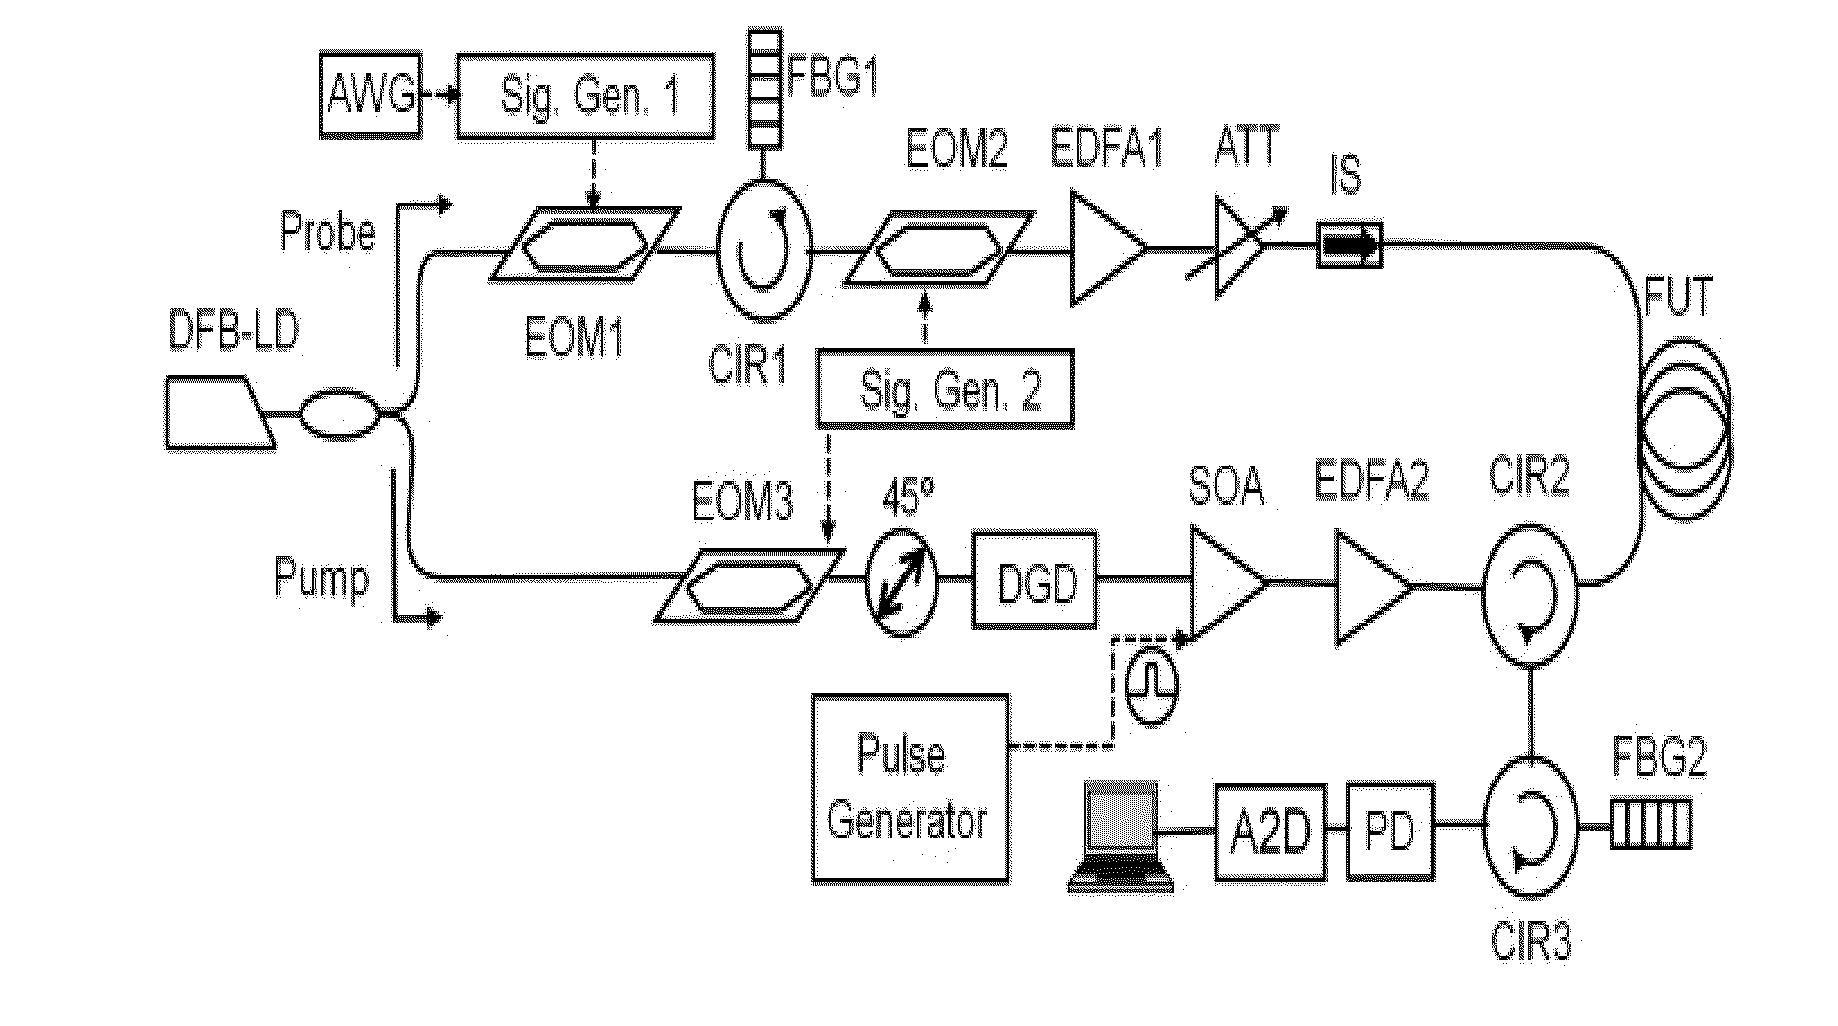 Method and system for an ultimately fast frequency-scanning brillouin optical time domain analyzer